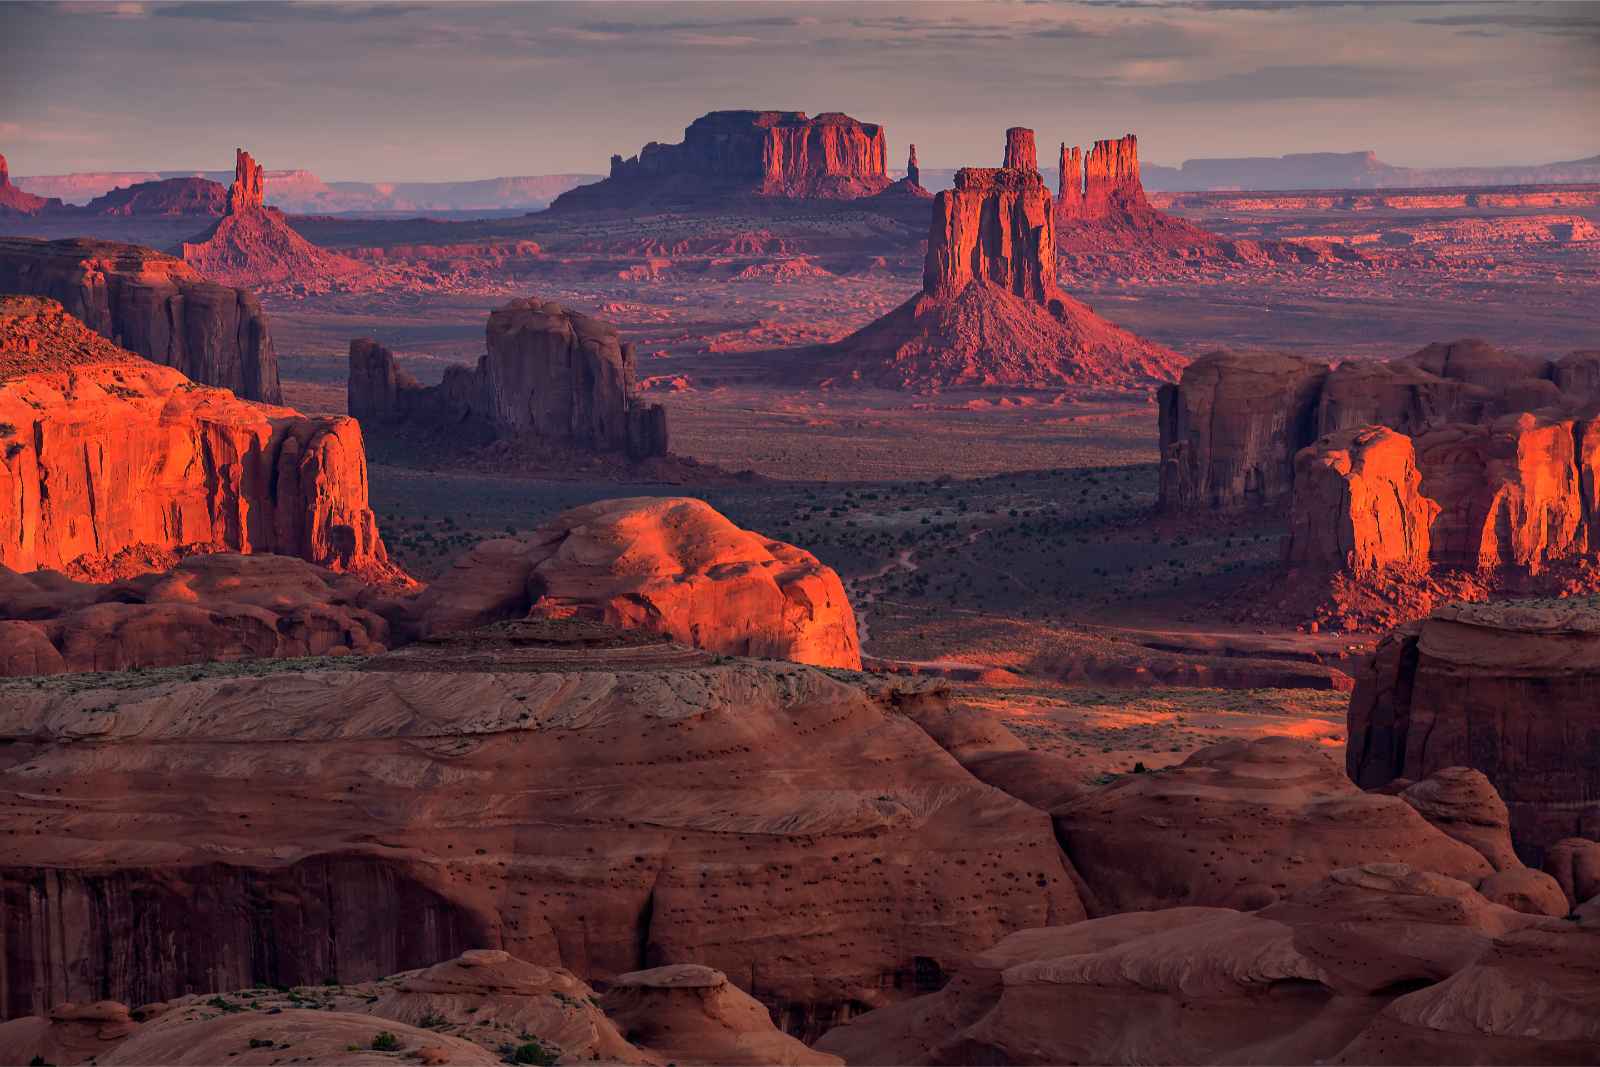 How to visit monument valley